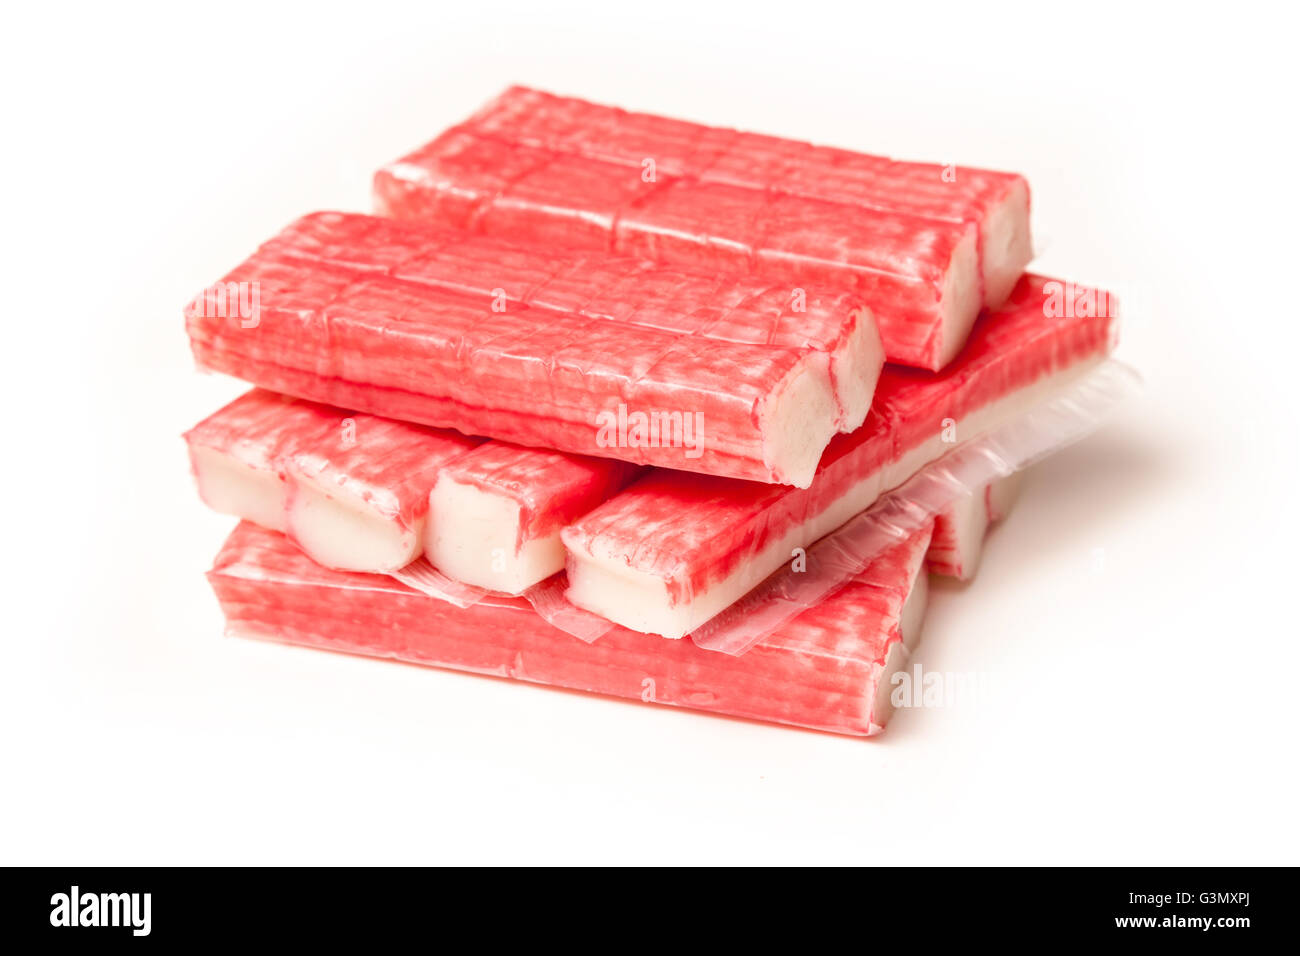 Fish sticks or crab sticks, Imitation crab sticks made from white fish usually Pollock and starch. Stock Photo